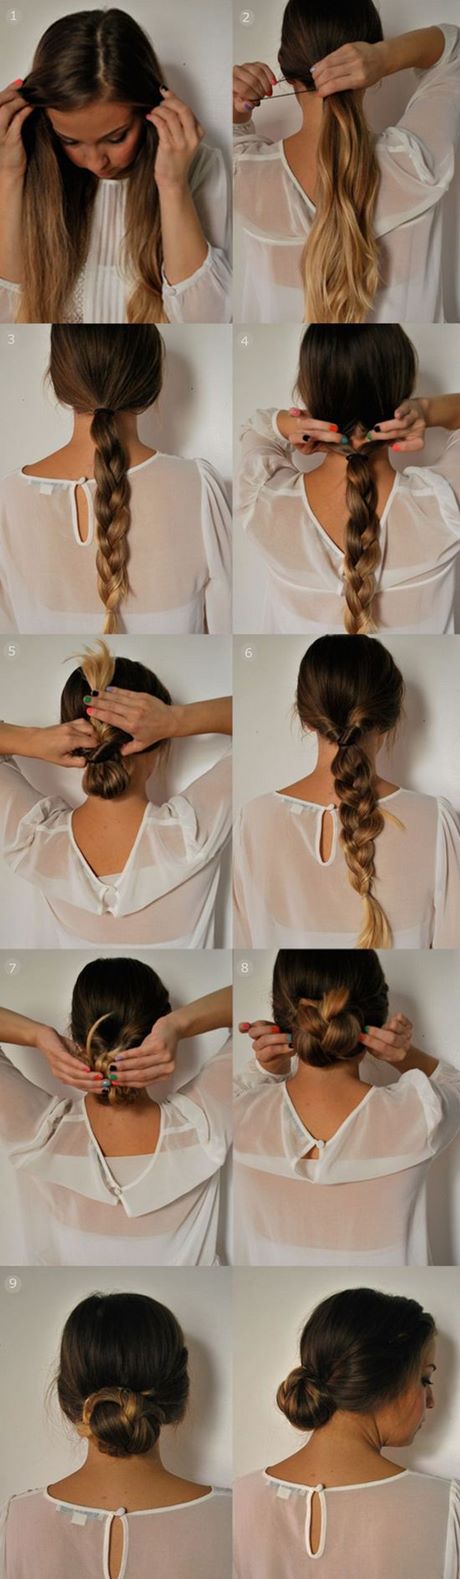 Cute and easy updo hairstyles cute-and-easy-updo-hairstyles-04_10